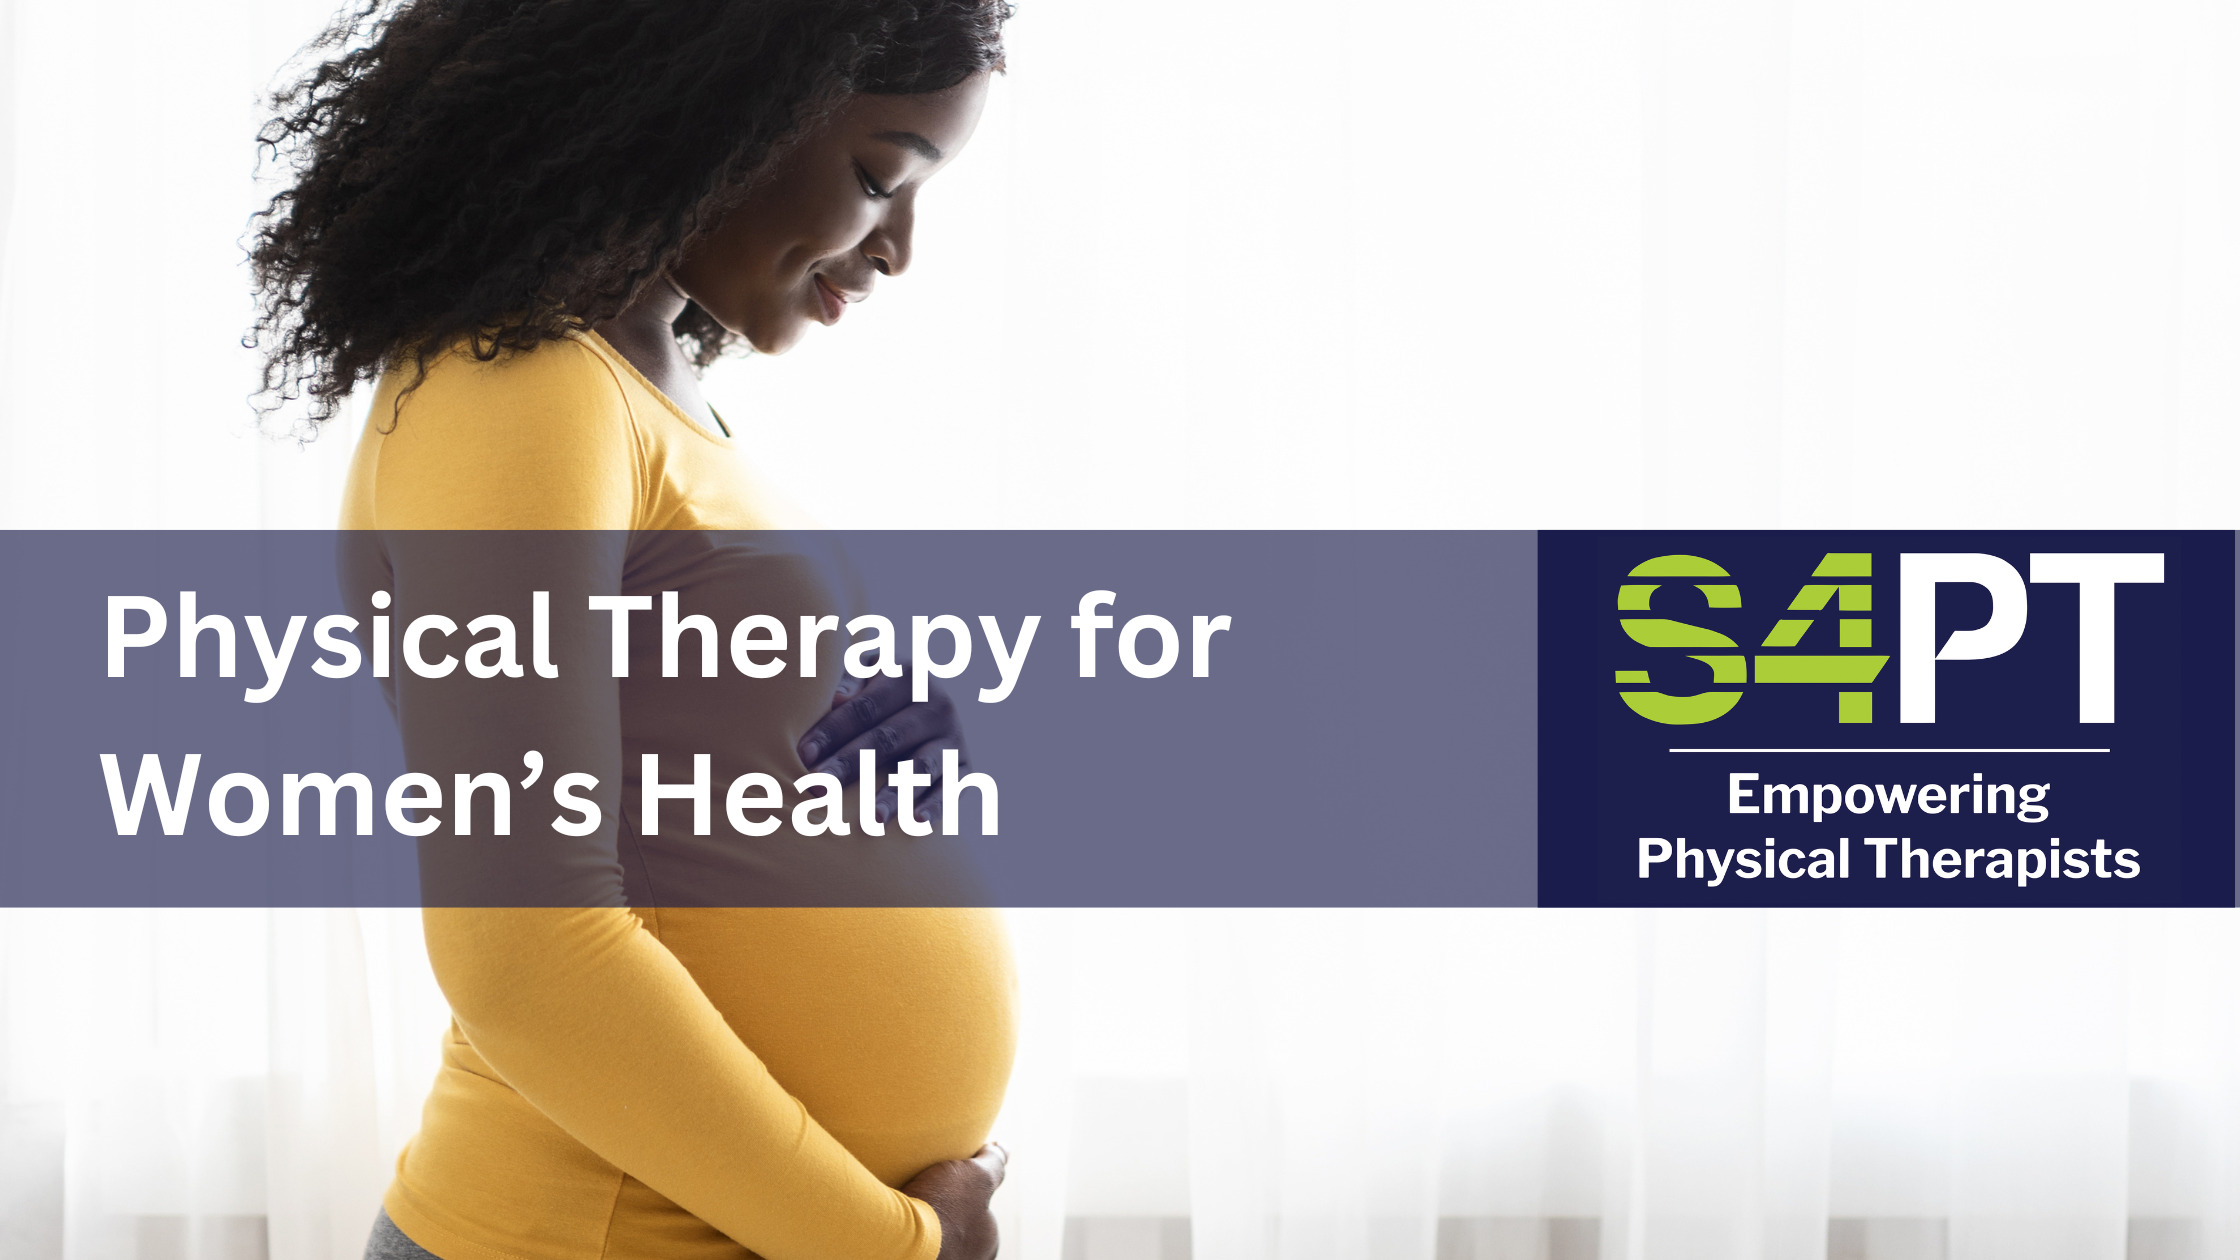 Physical Therapy for women's health: PostPartum Care and Recovery with PT